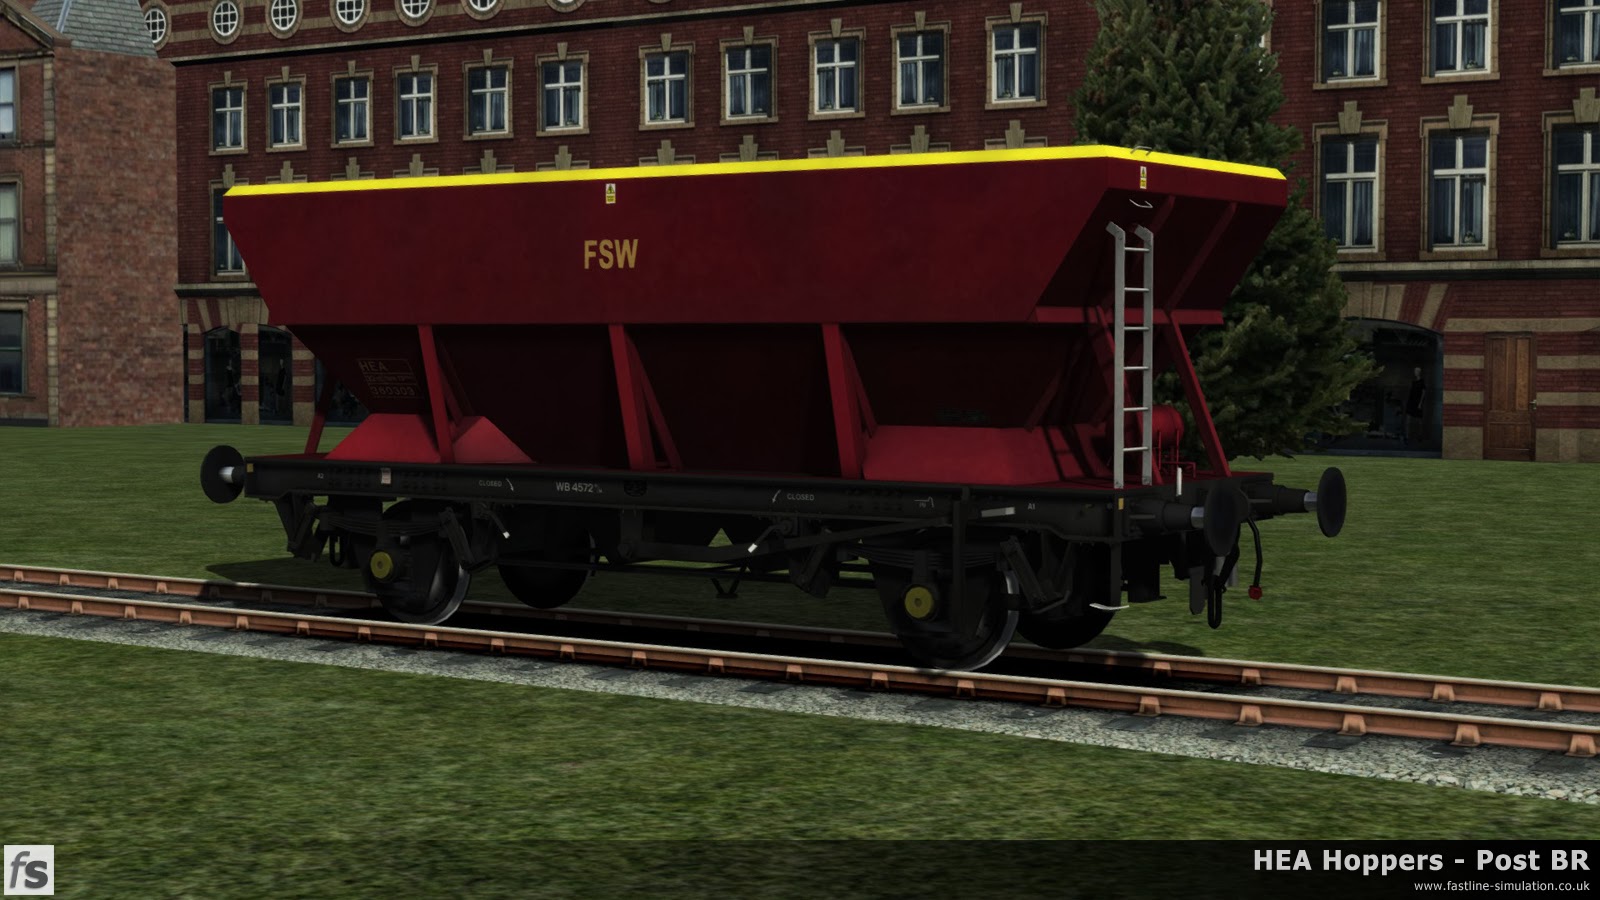 HEA Hoppers - Post BR: One of the later offset ladder HEA hoppers in almost ex-works Red and Gold livery under development for Train Simulator 2014.